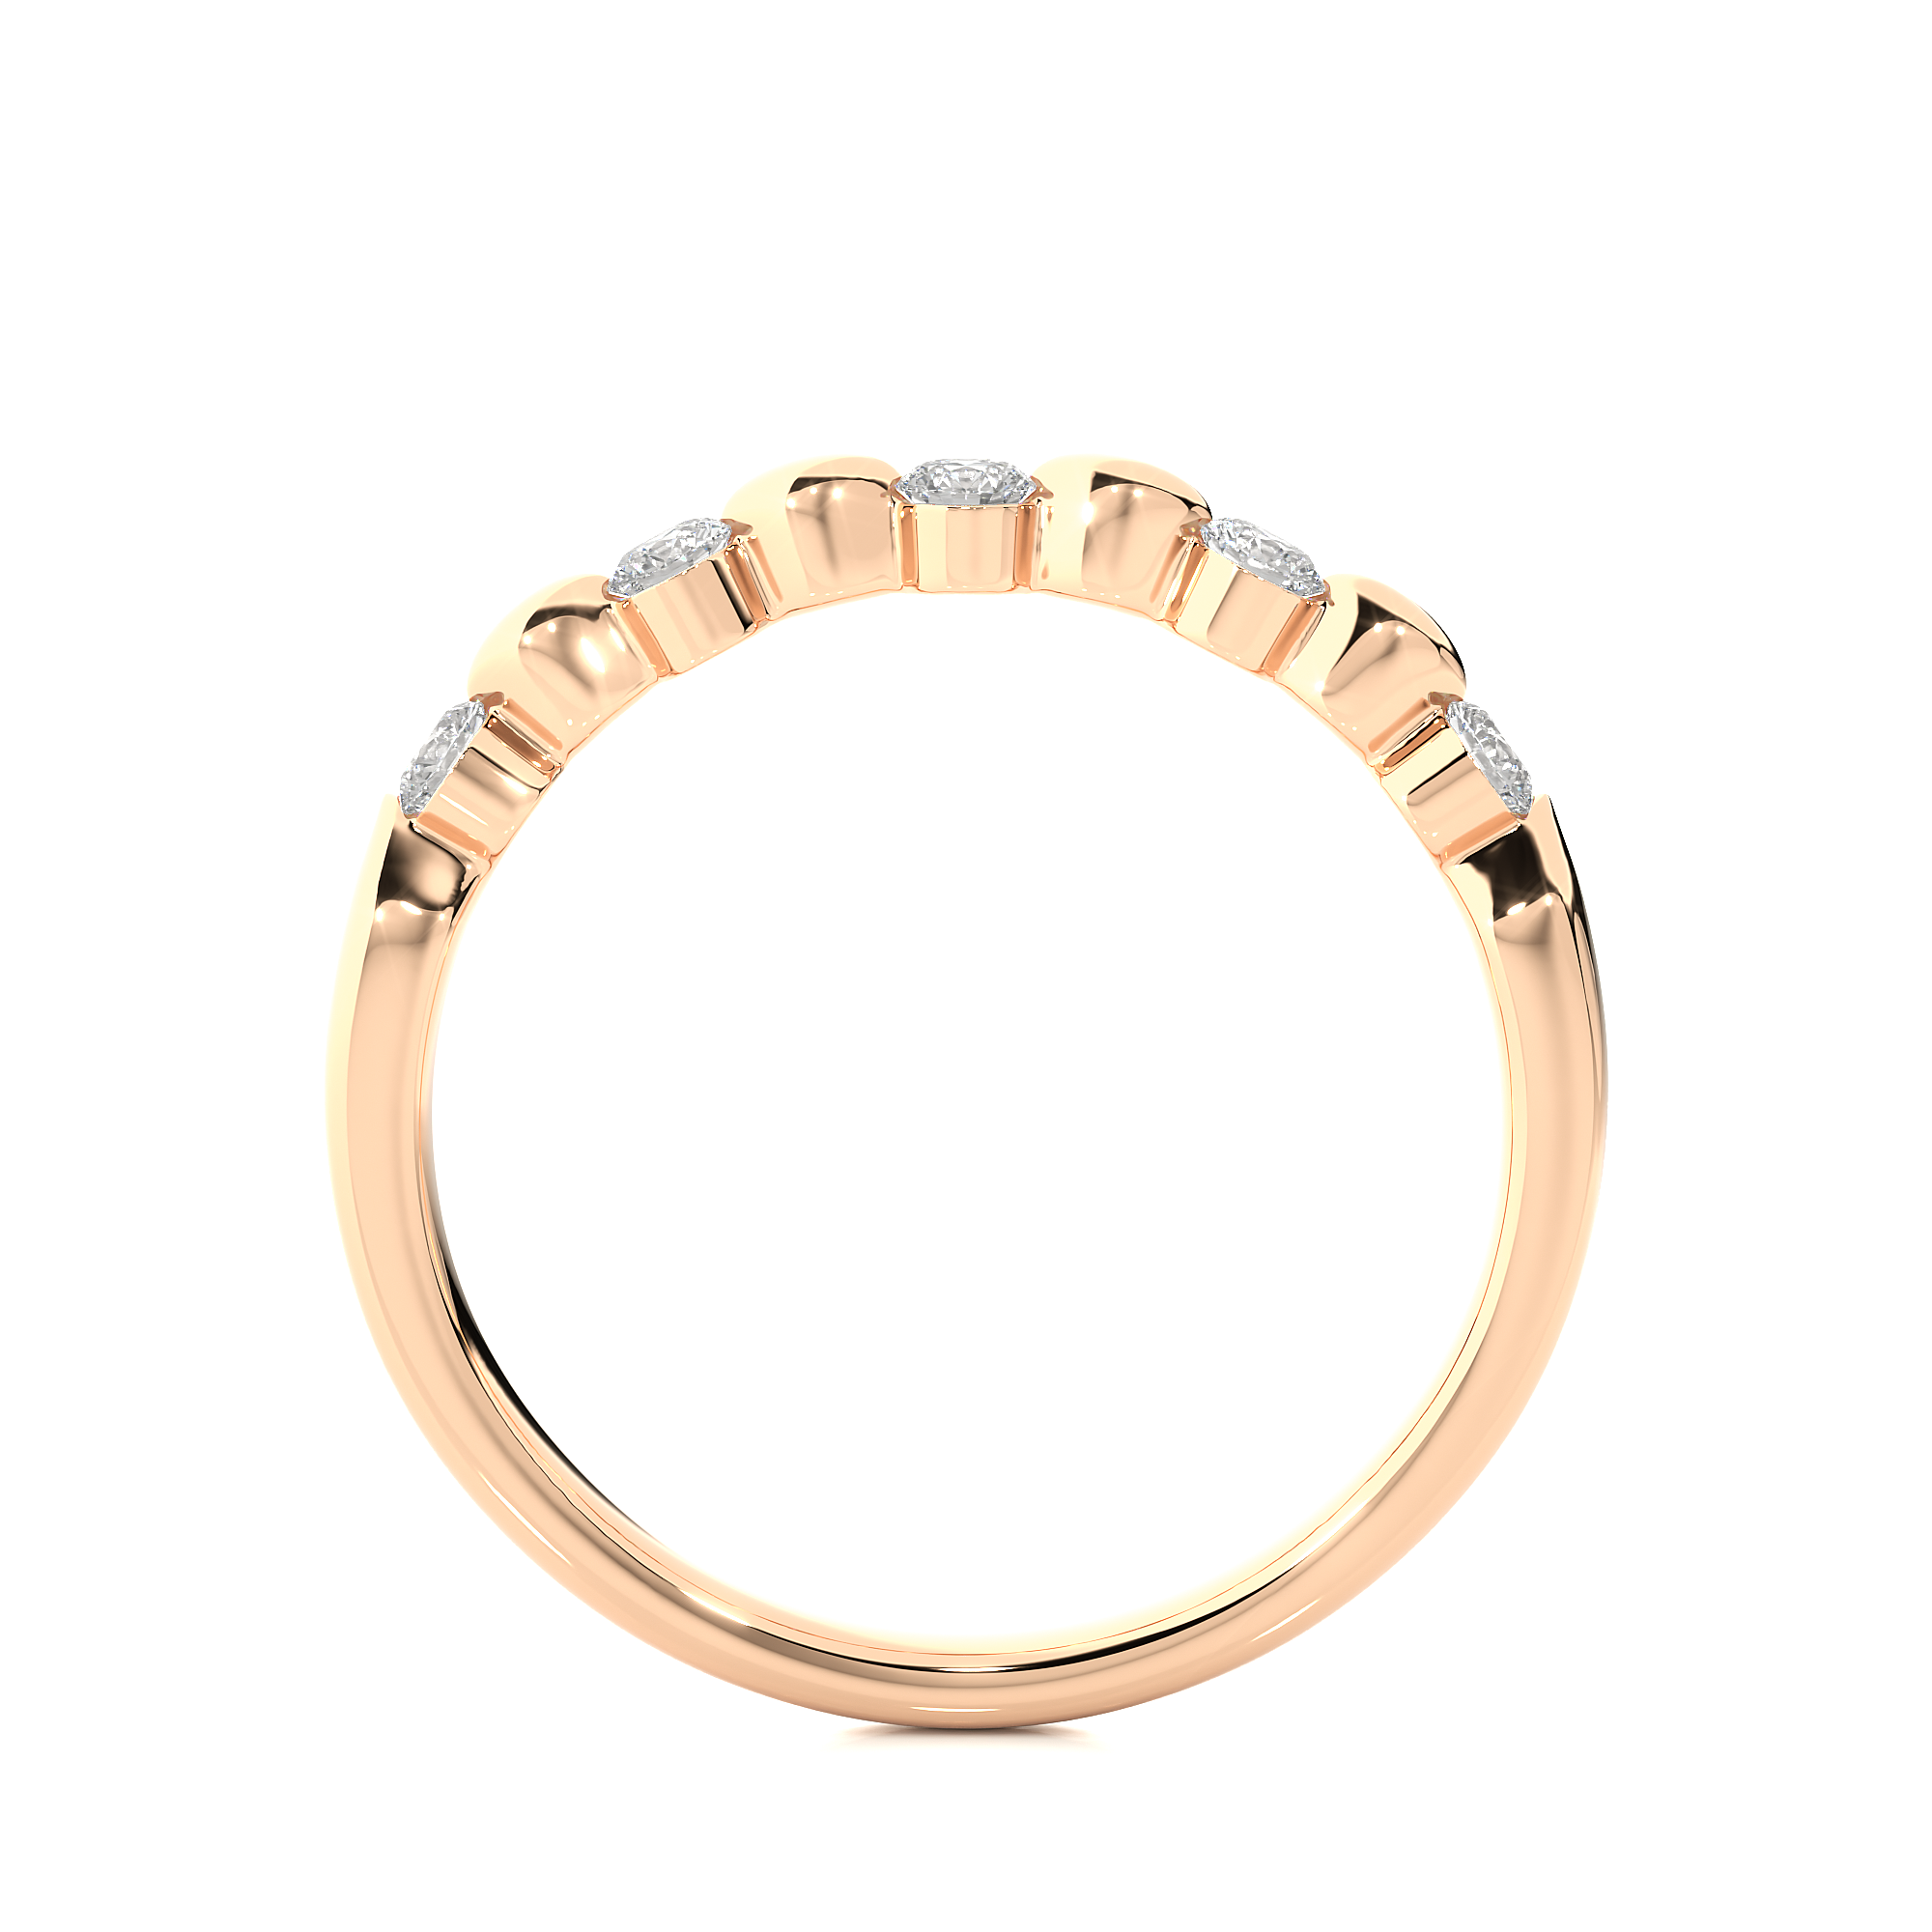 Melody of Affection Solitaire Lab Grown Diamond Ring